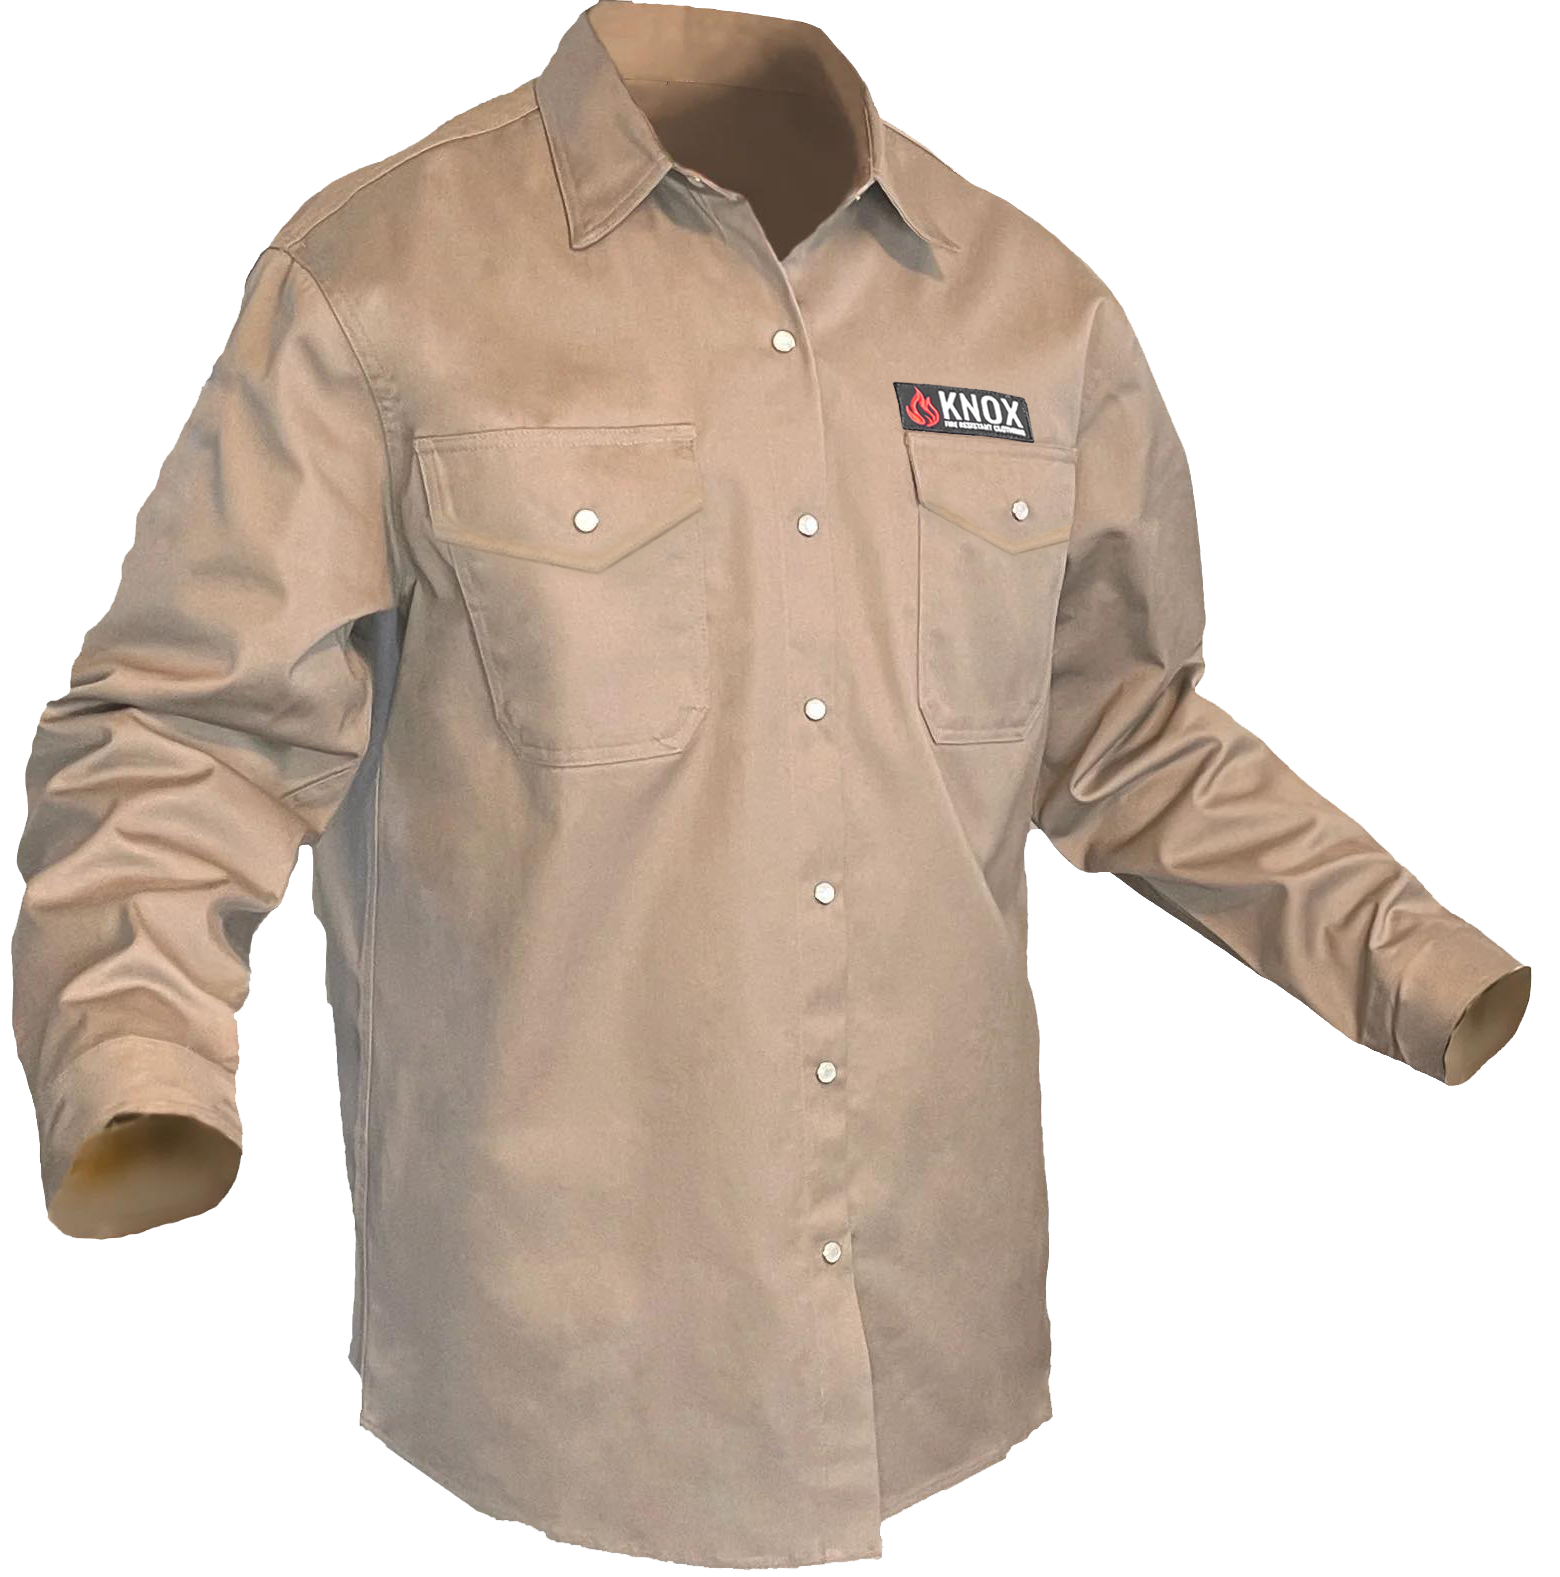 The Dragup Edition FR Shirt With Pearl Snap Buttons